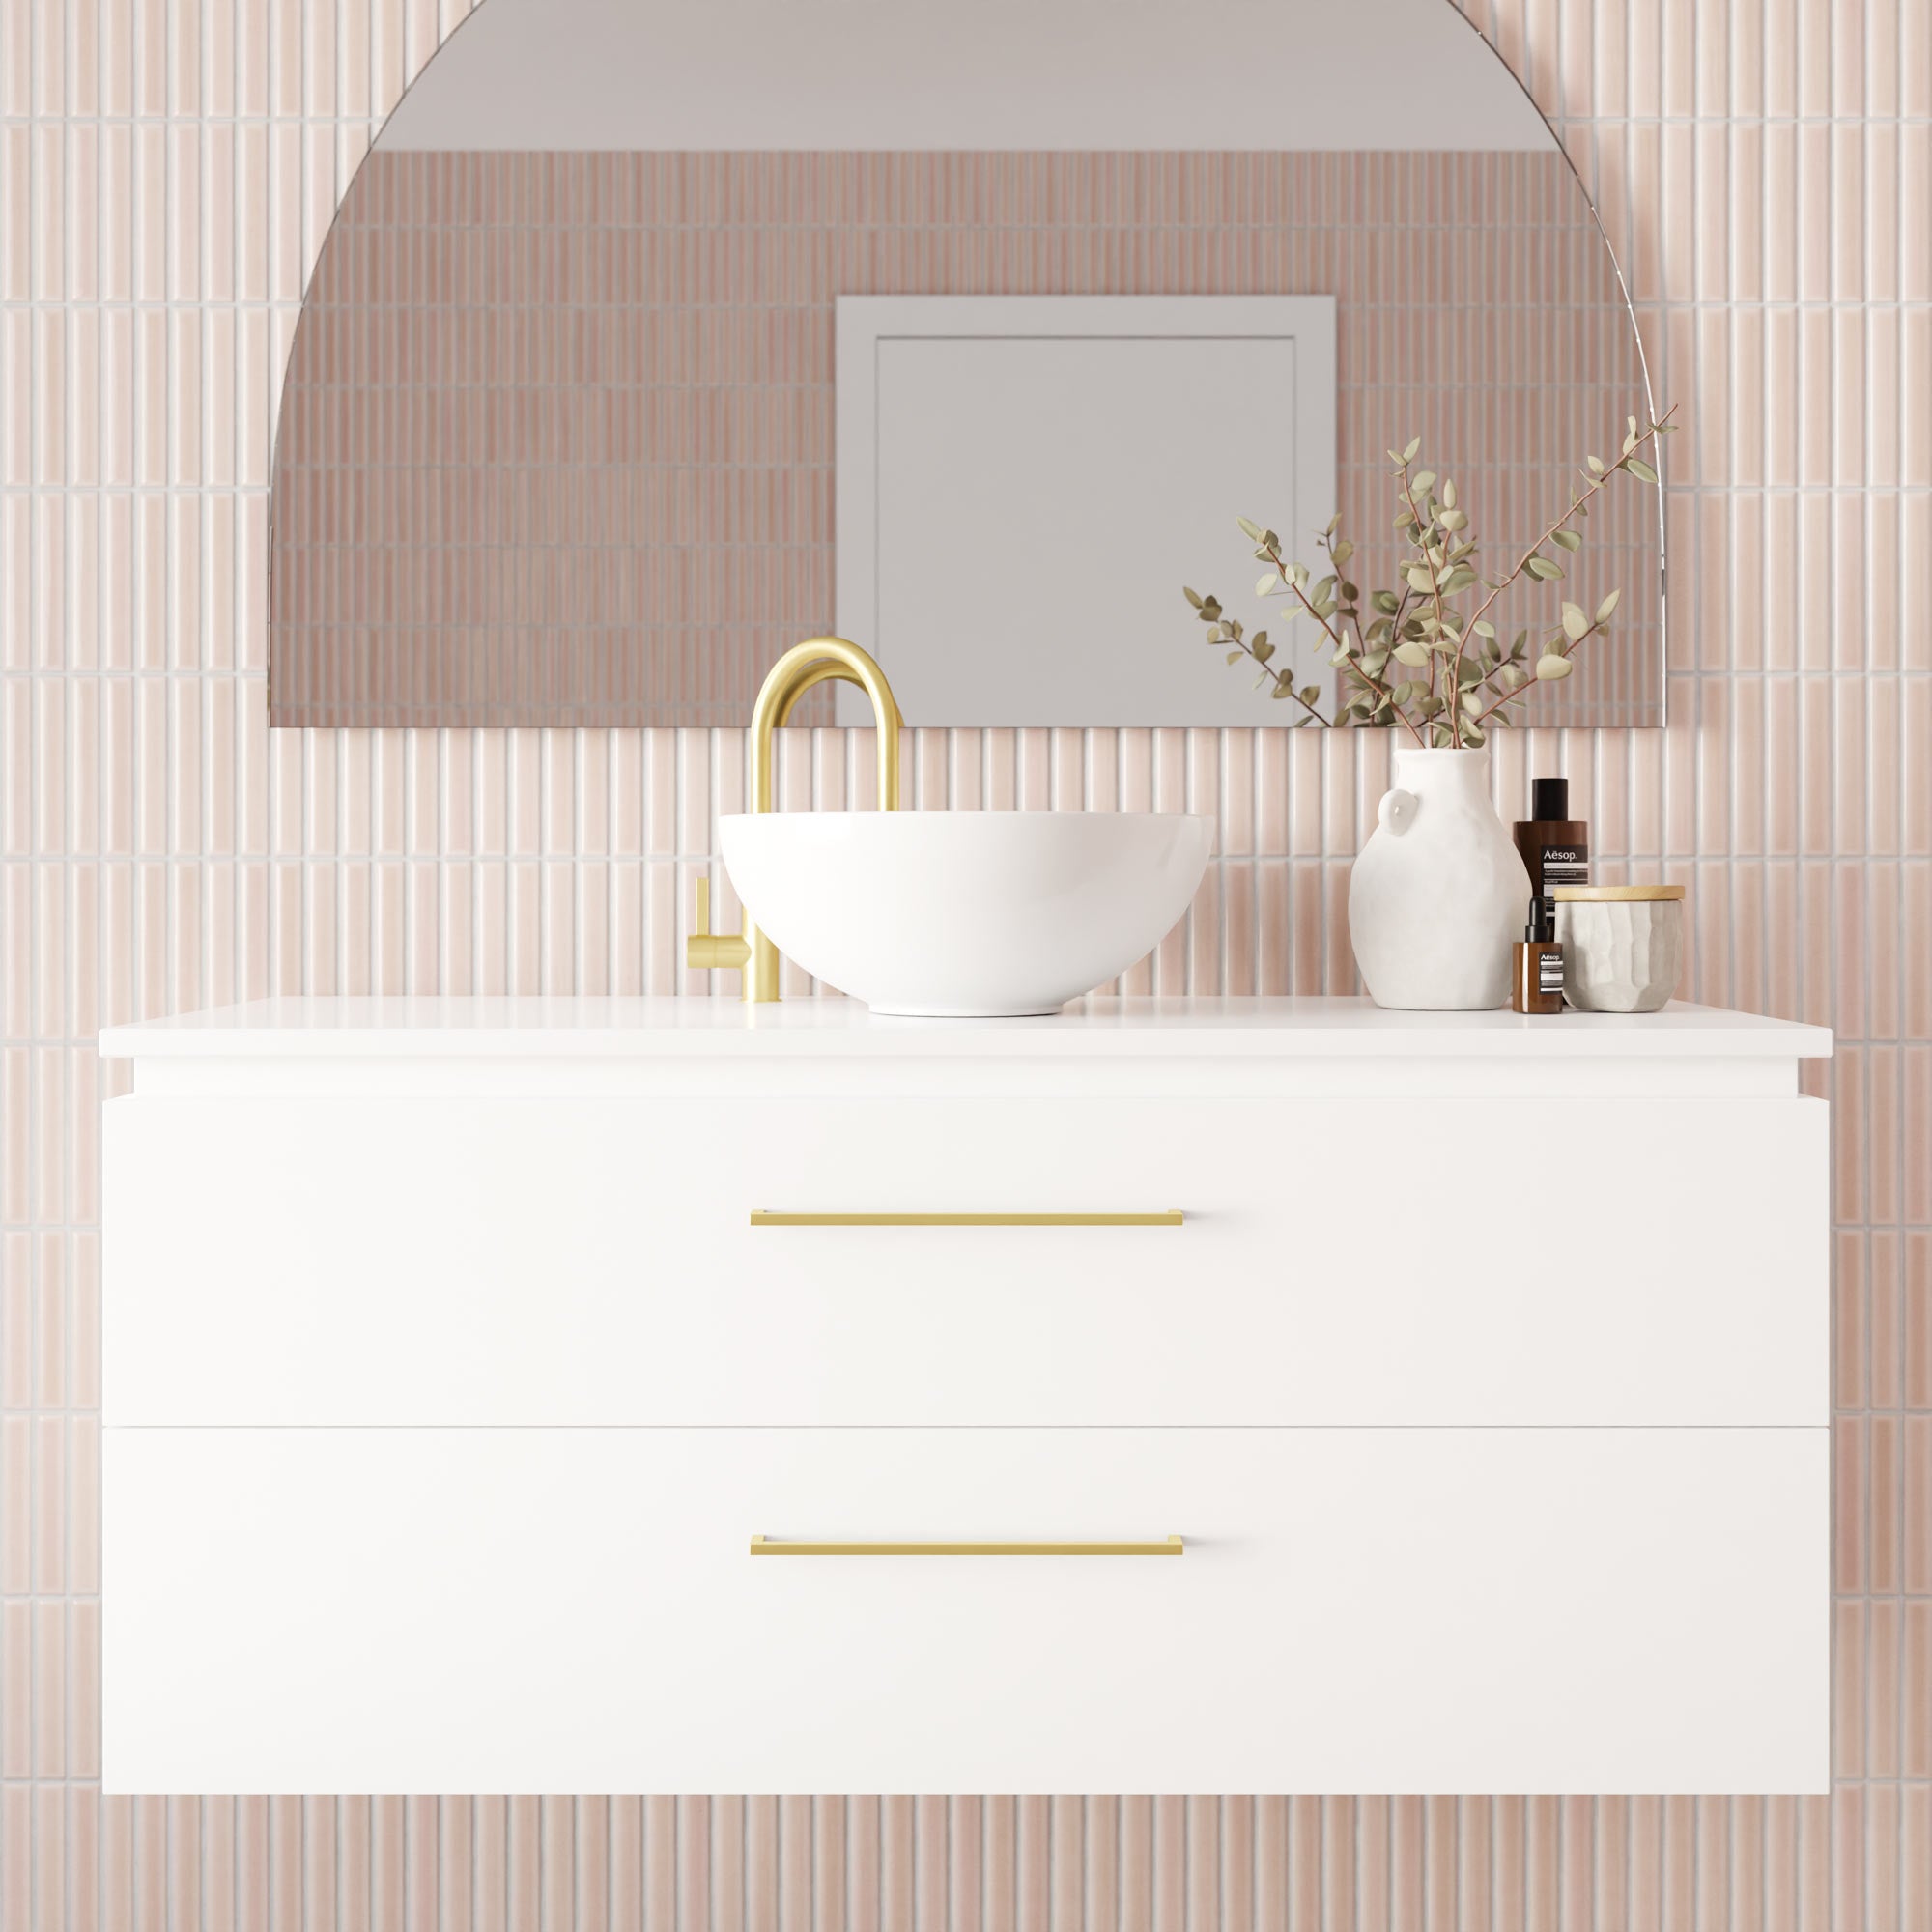 Riviera Vanity with Under-Counter Basin